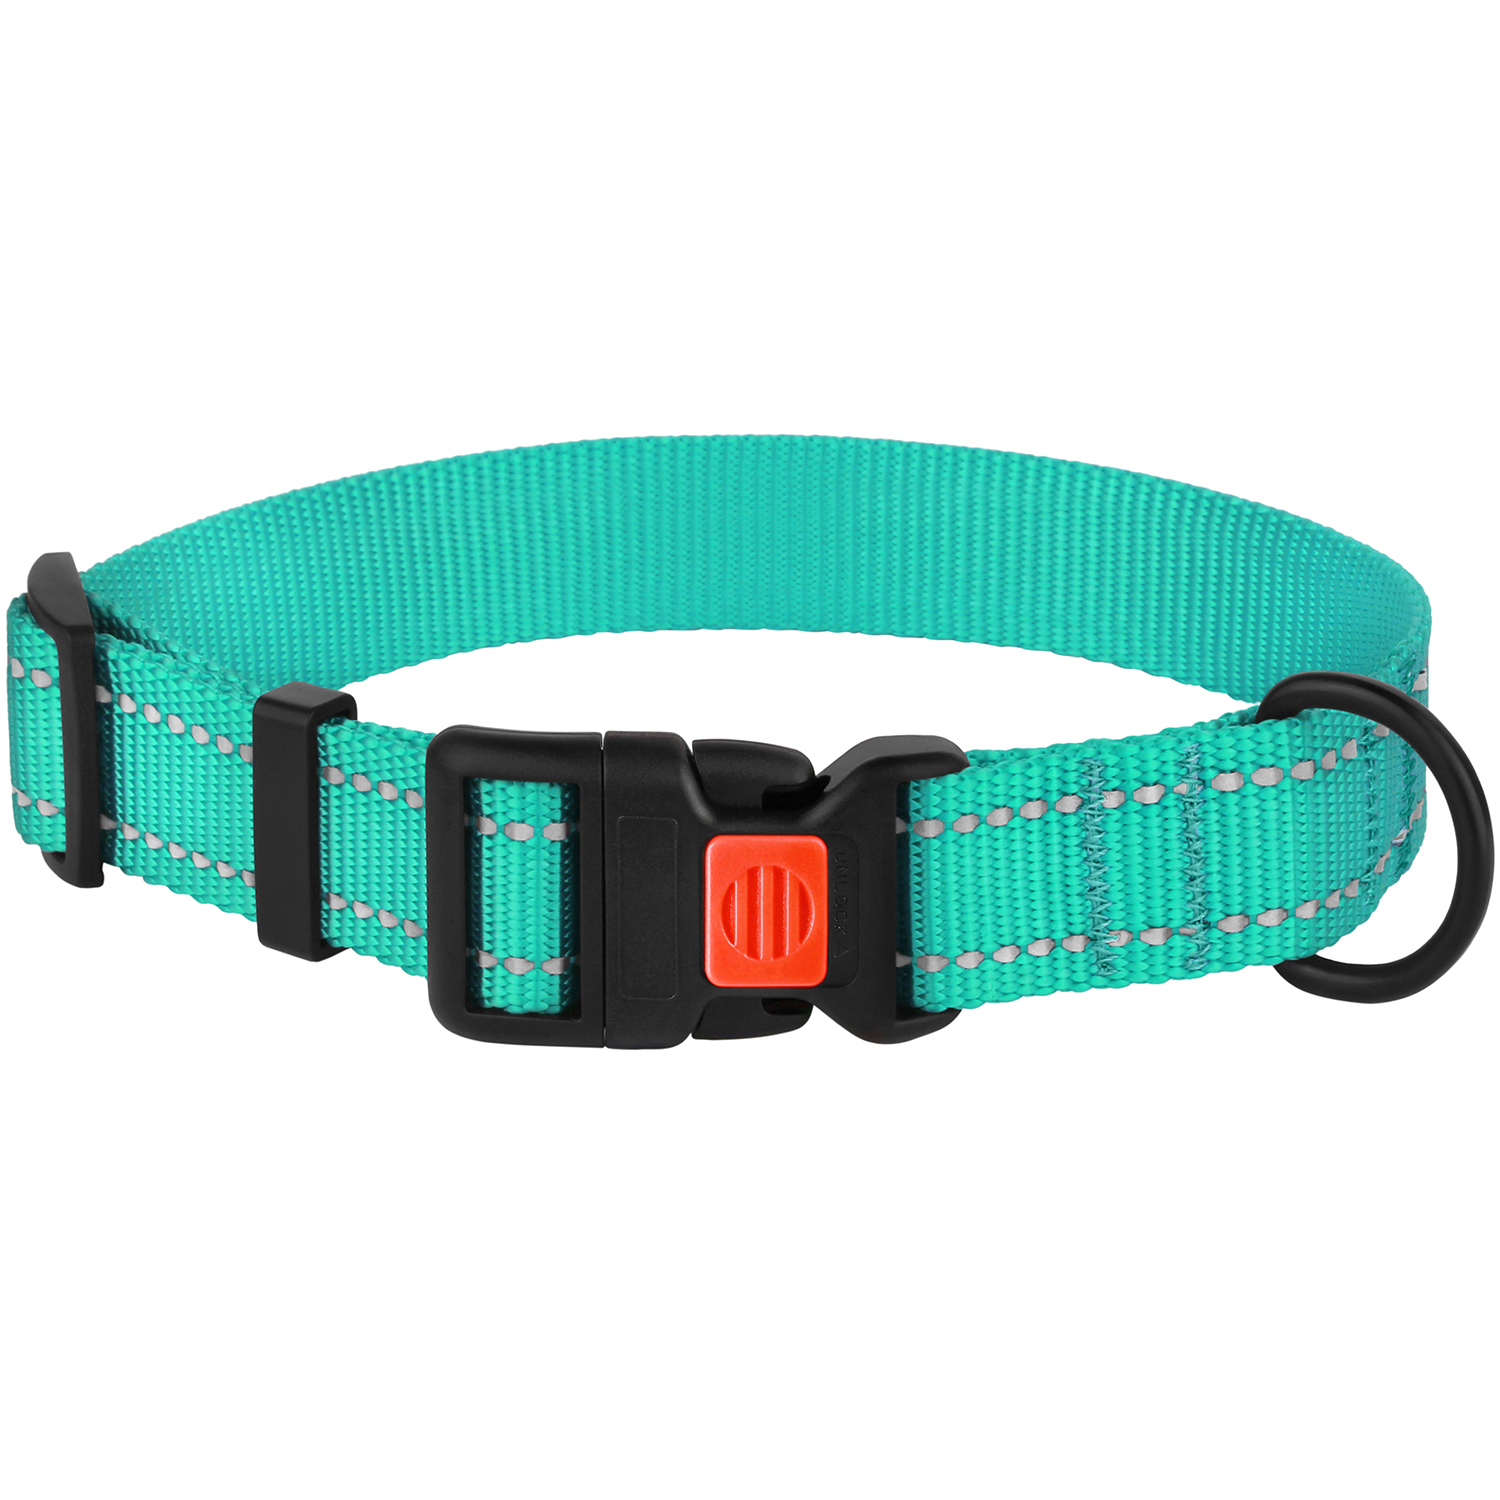 CollarDirect Reflective Dog Collar Safety Nylon Collars for Medium Dogs with Buckle, Mint Green - image 4 of 7